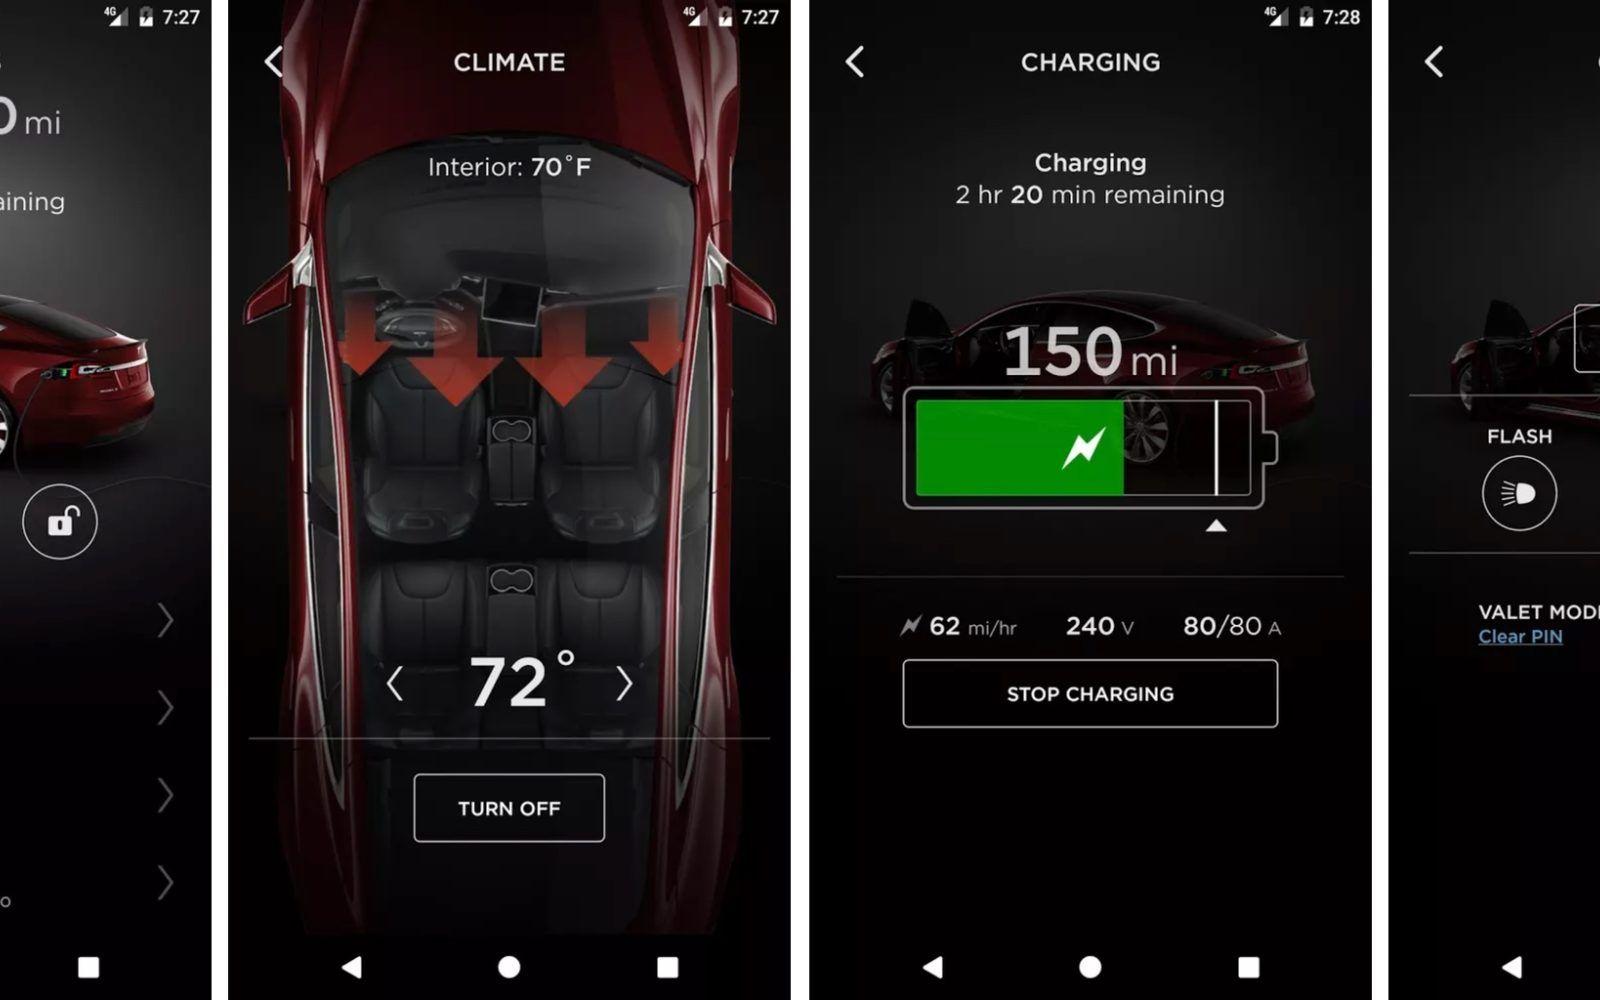 Tesla App Logo - First look with pictures at Tesla's new mobile app with new UI ...